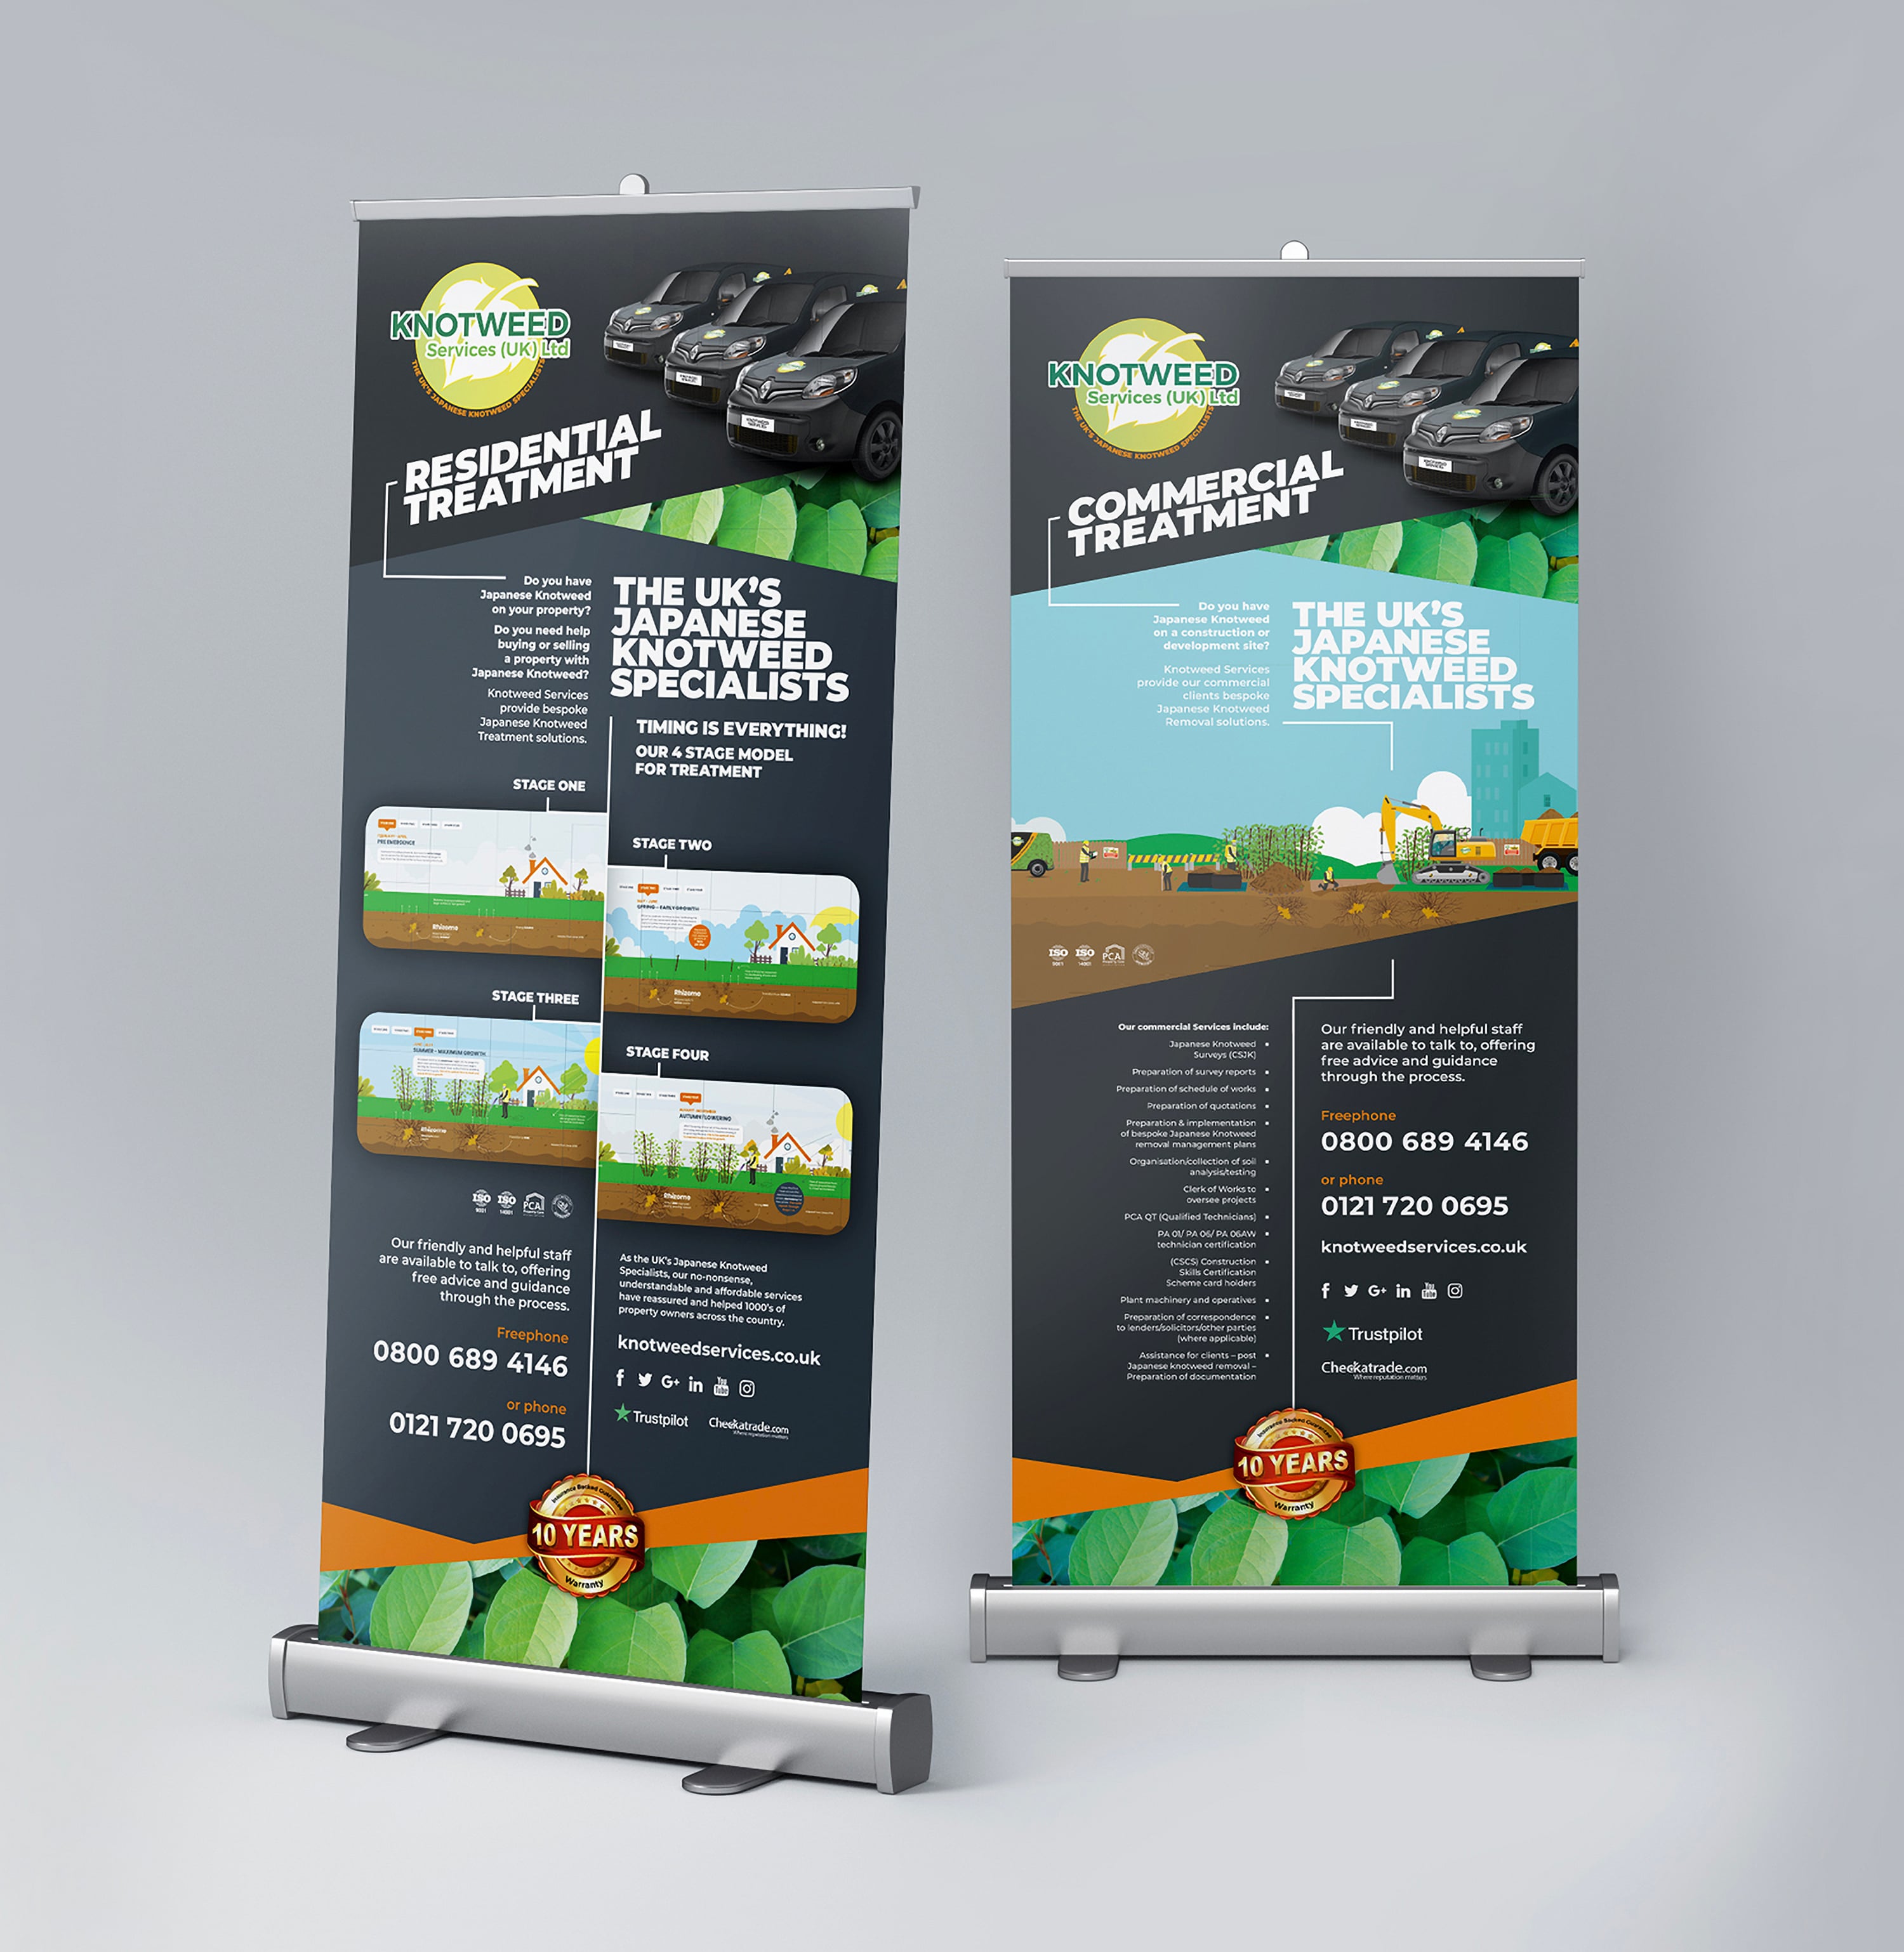 knotweed services pullup banner 01